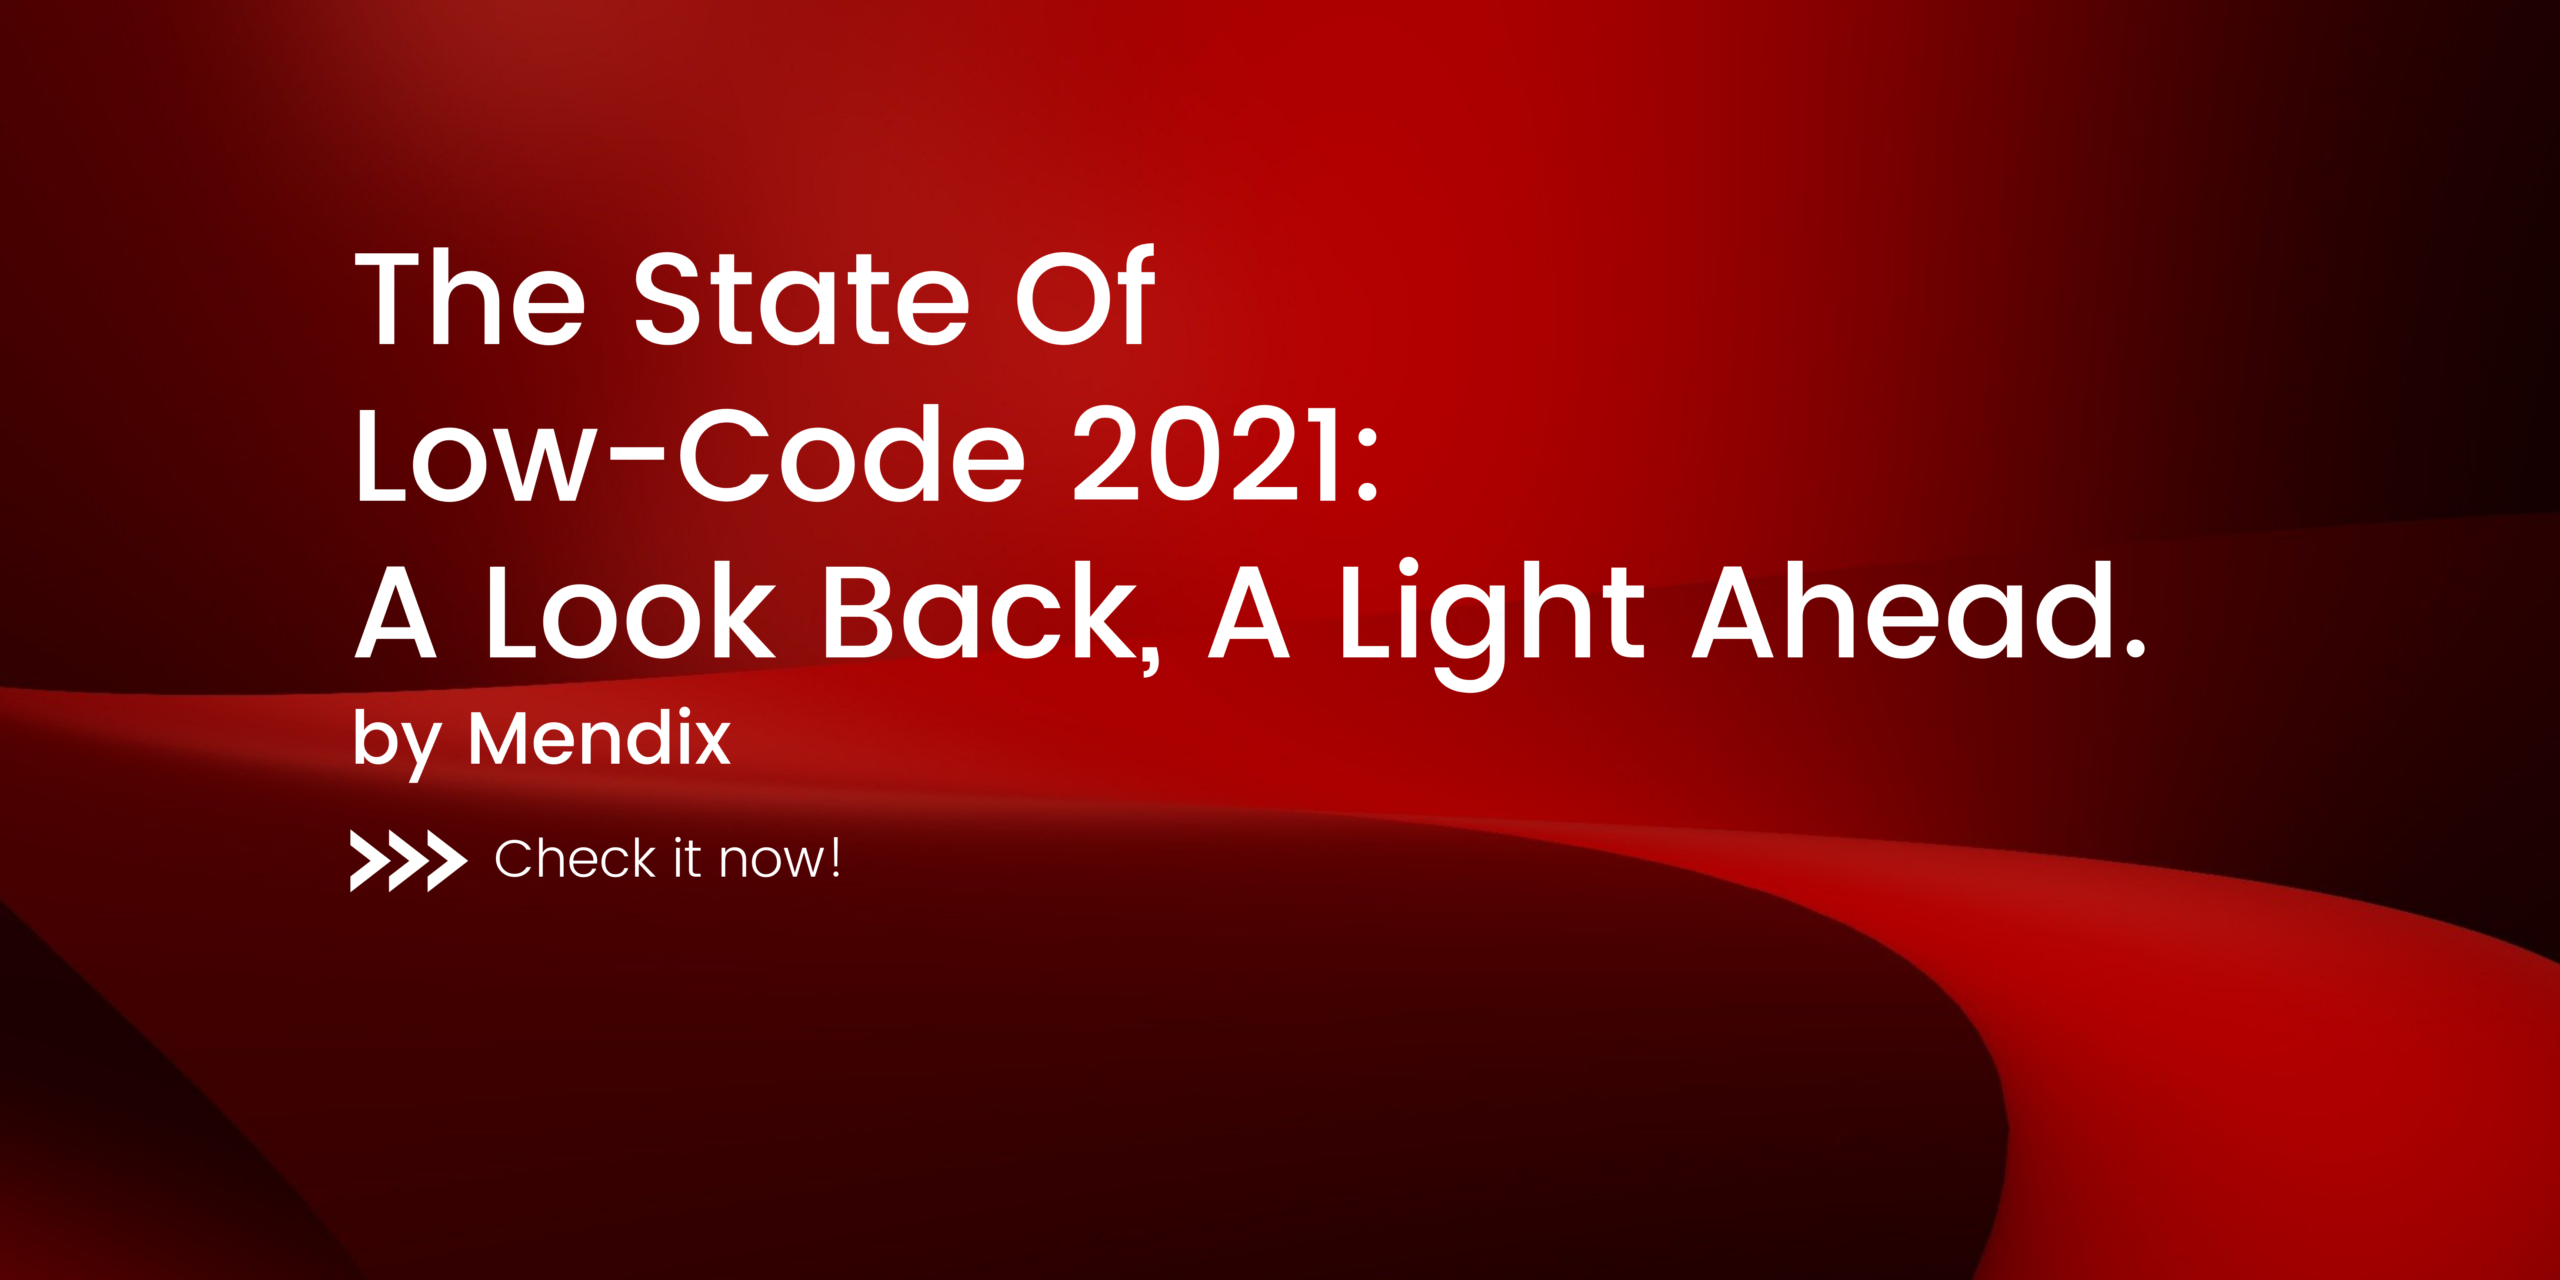 The State Of Low-Code 2021: A Look Back, A Light Ahead by Mendix